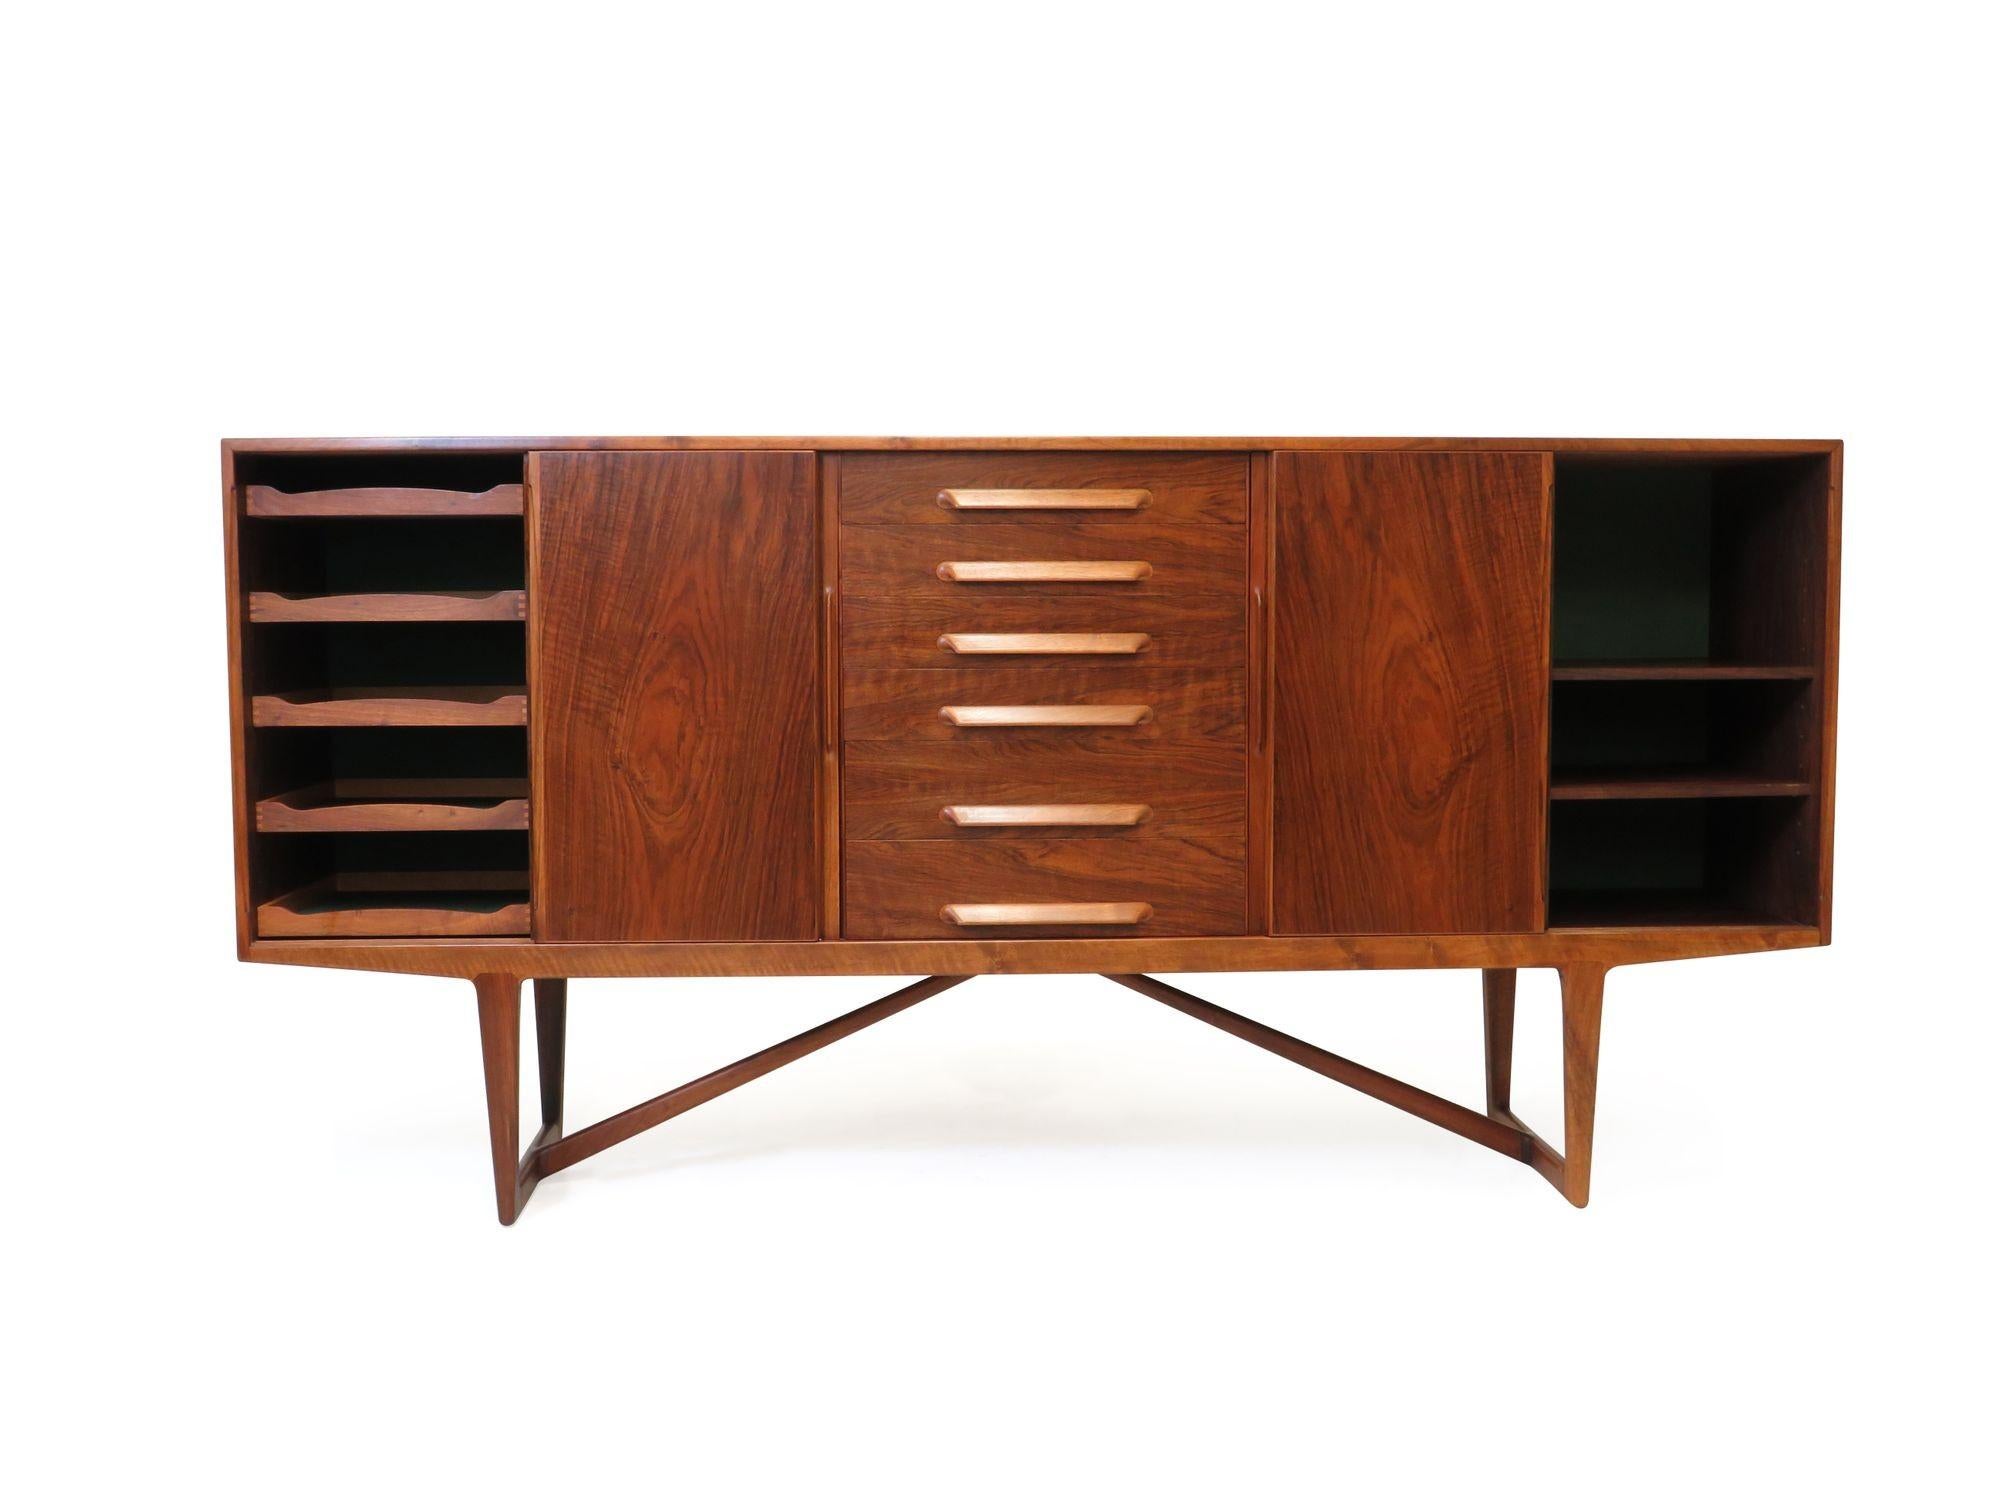 Sideboard designed by Kurt Ostervig for Brande Møbelfabrik, 1956, Denmark. Features a stunning burled walnut exterior with pattern match on the doors, finely mitered corners, and series of drawers in center, each with sculpted inset pulls. The